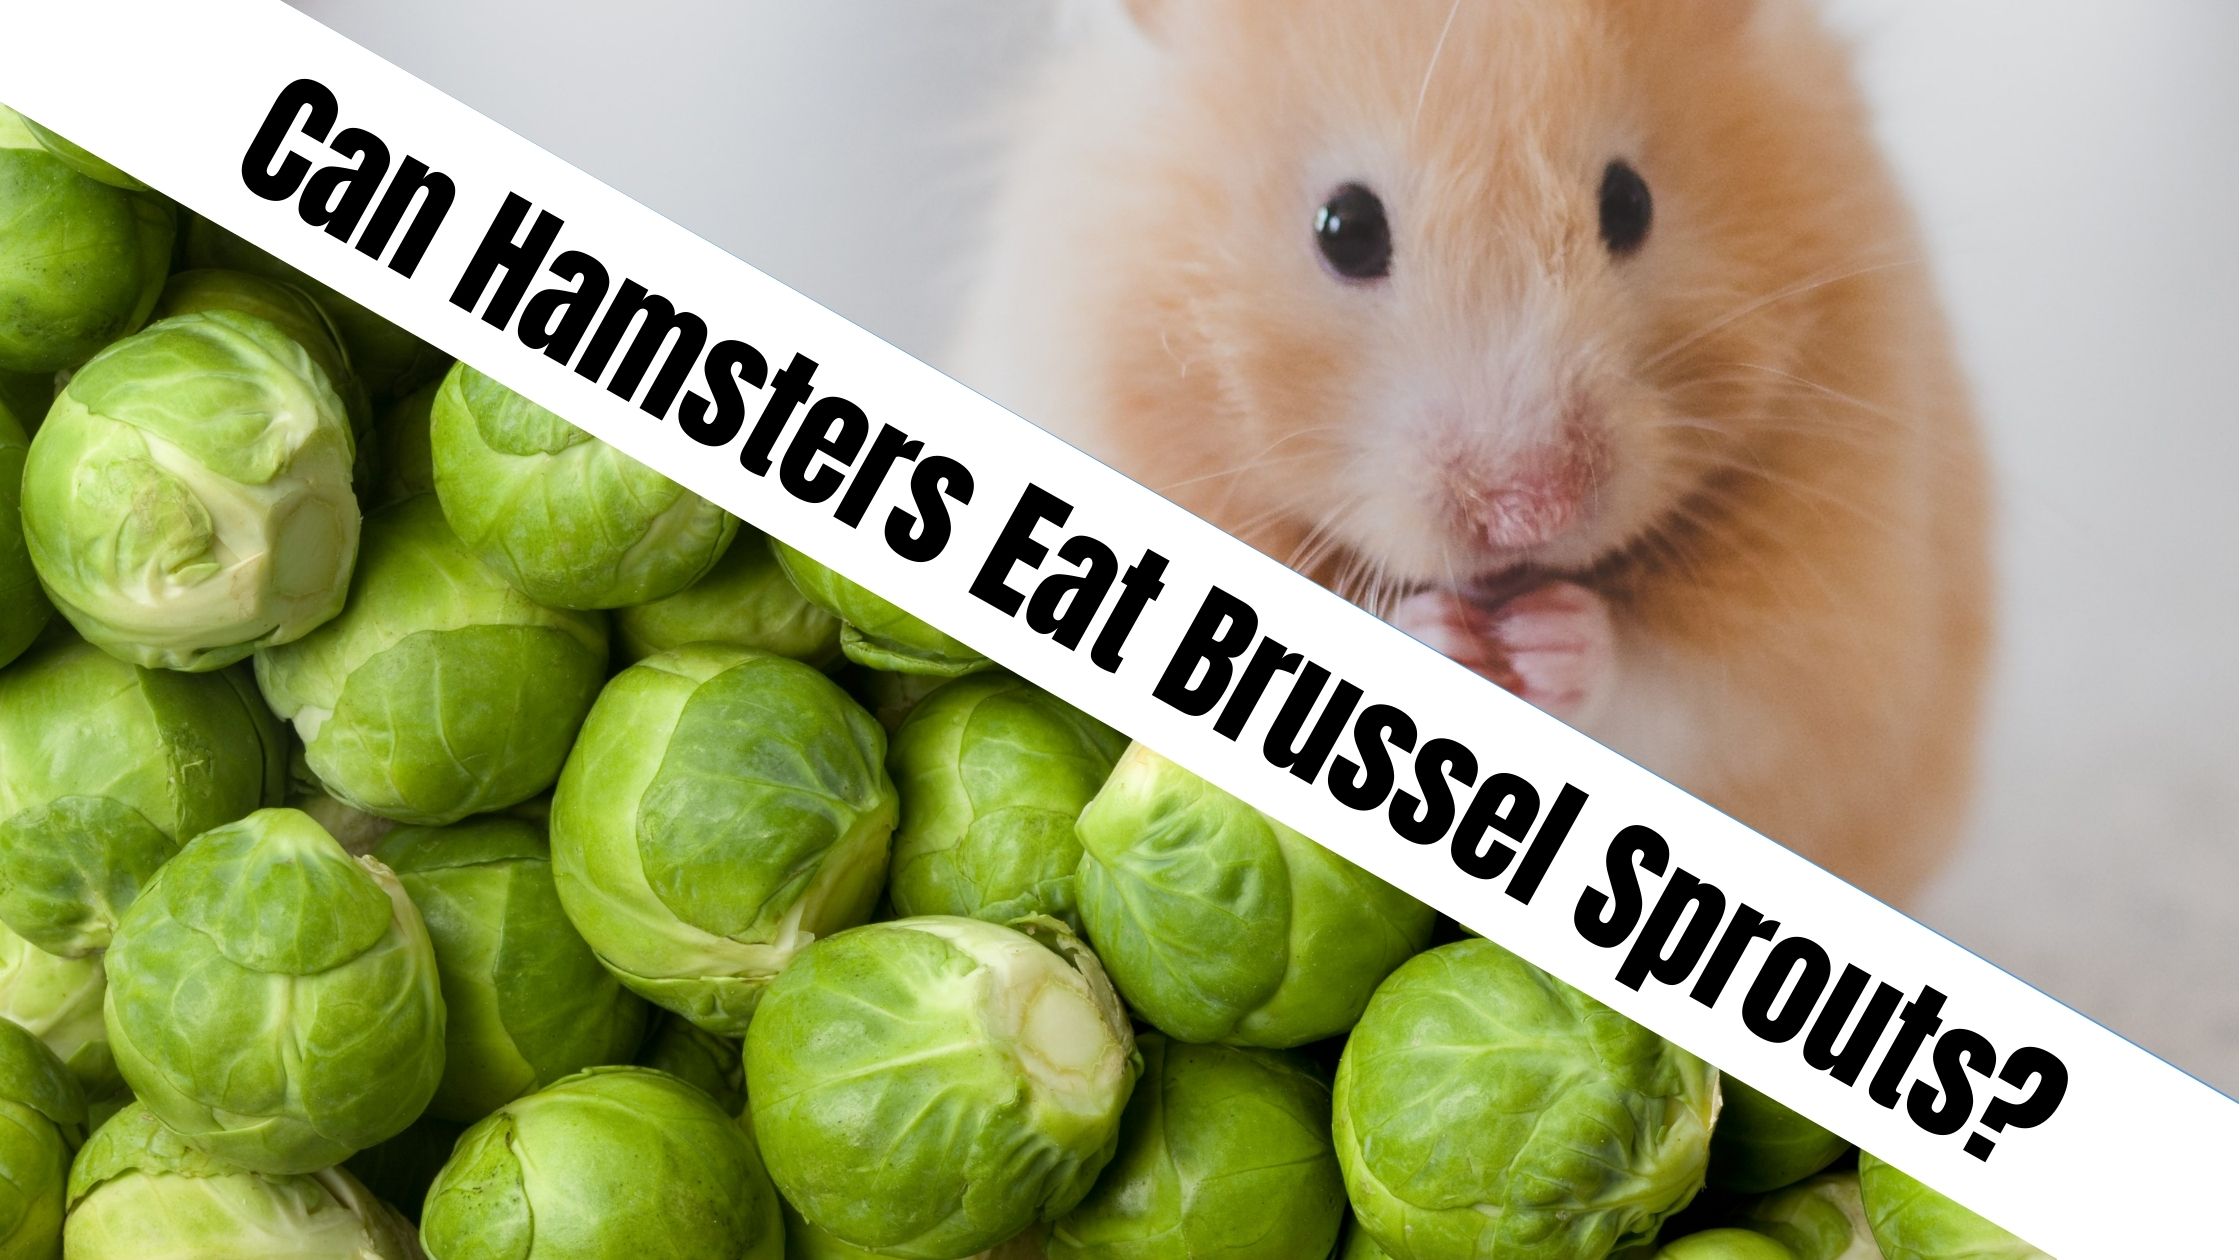 Can Hamsters Eat Brussel Sprouts?